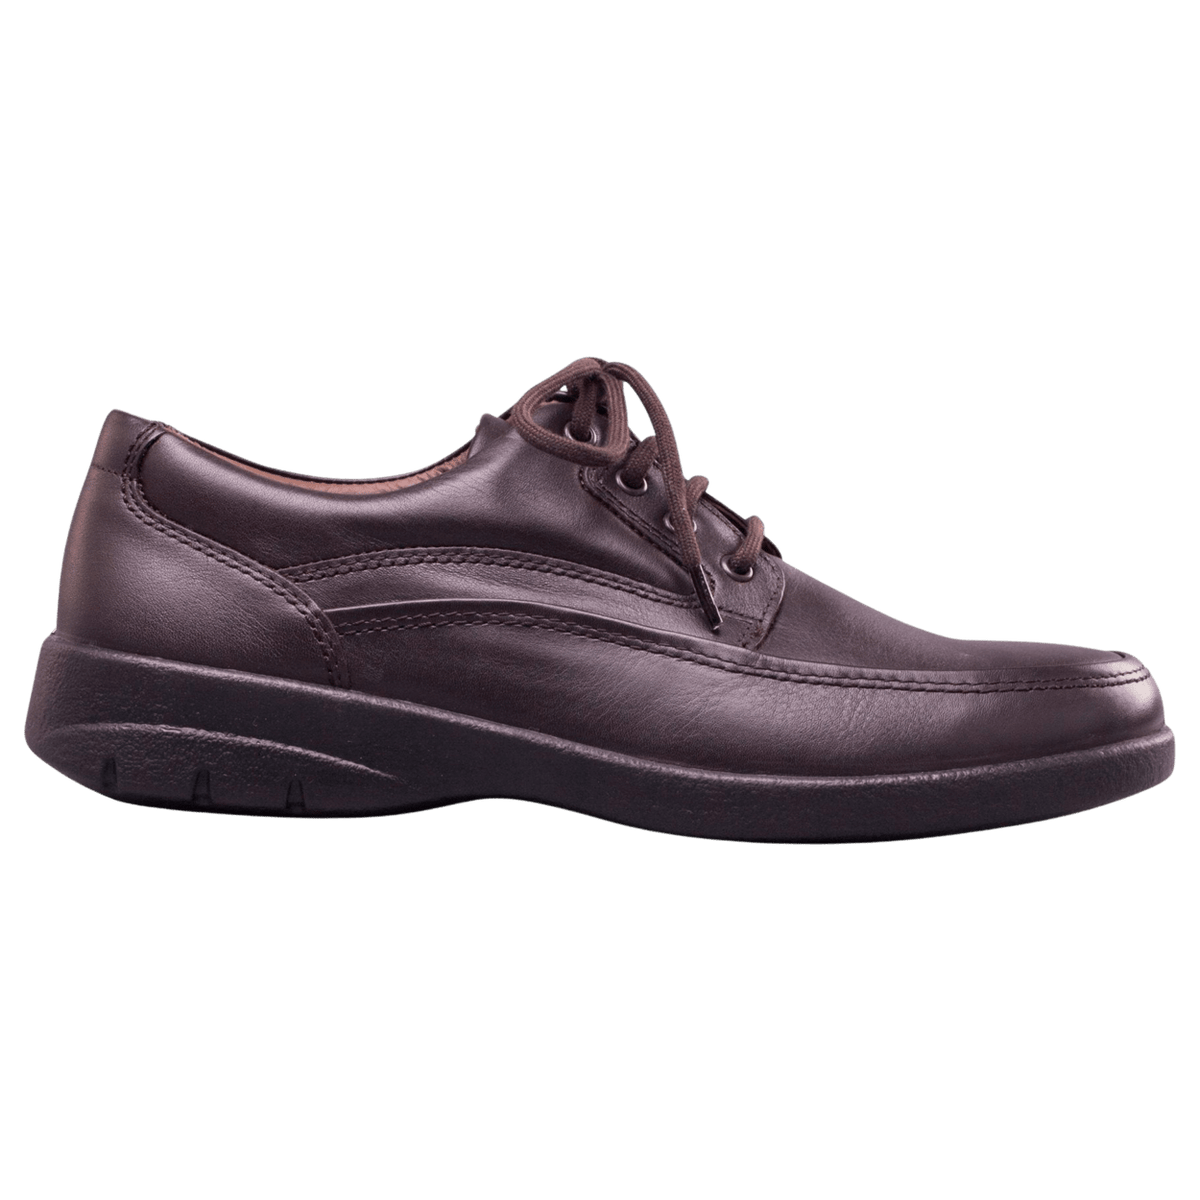 Padders Fire Lace Shoes For Men | Coes